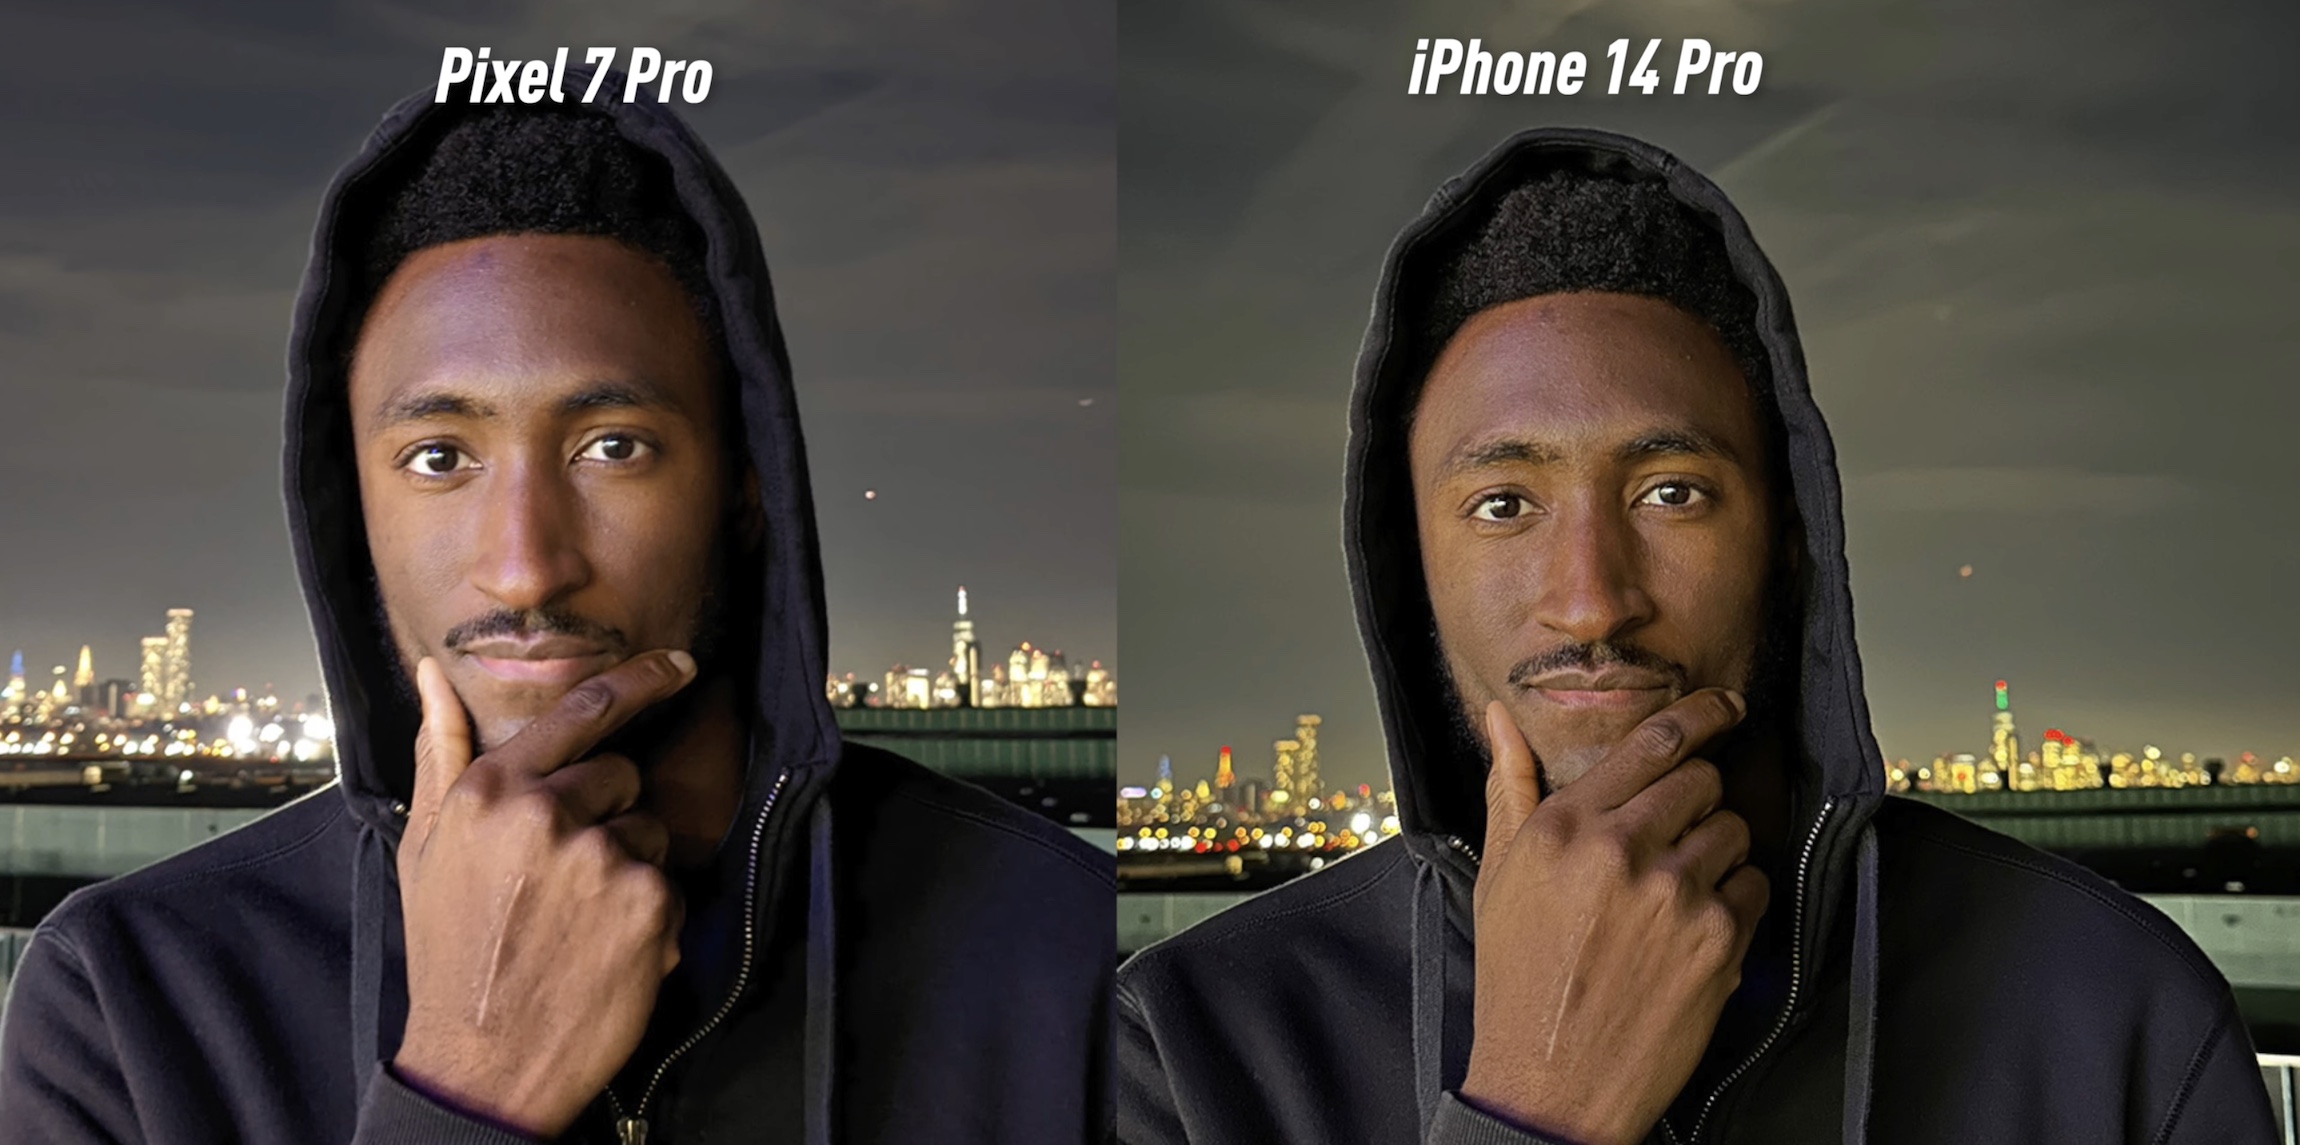 MKBHD claims that post-processing is ruining iPhone photos – and I agree with that